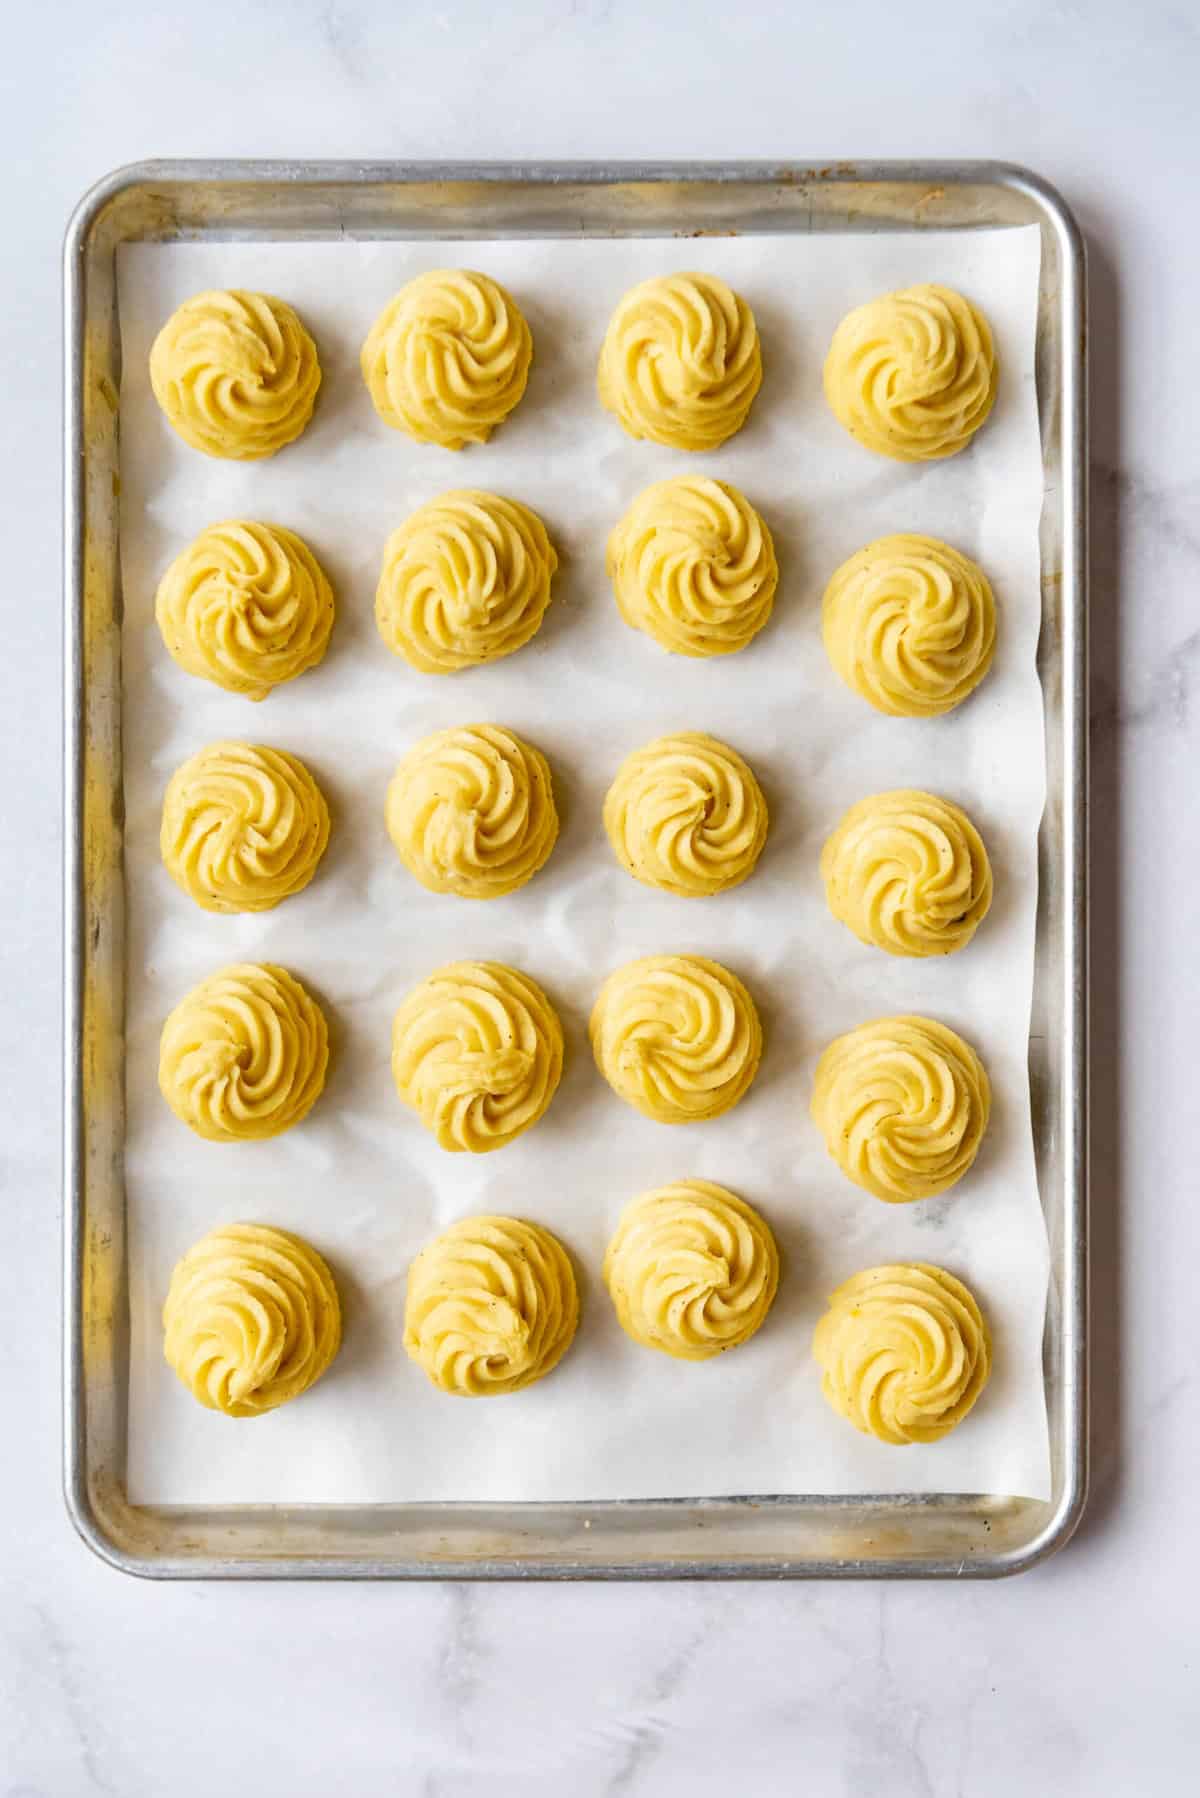 Mashed potatoes piped into swirled mounds on a baking sheet lined with parchment paper.